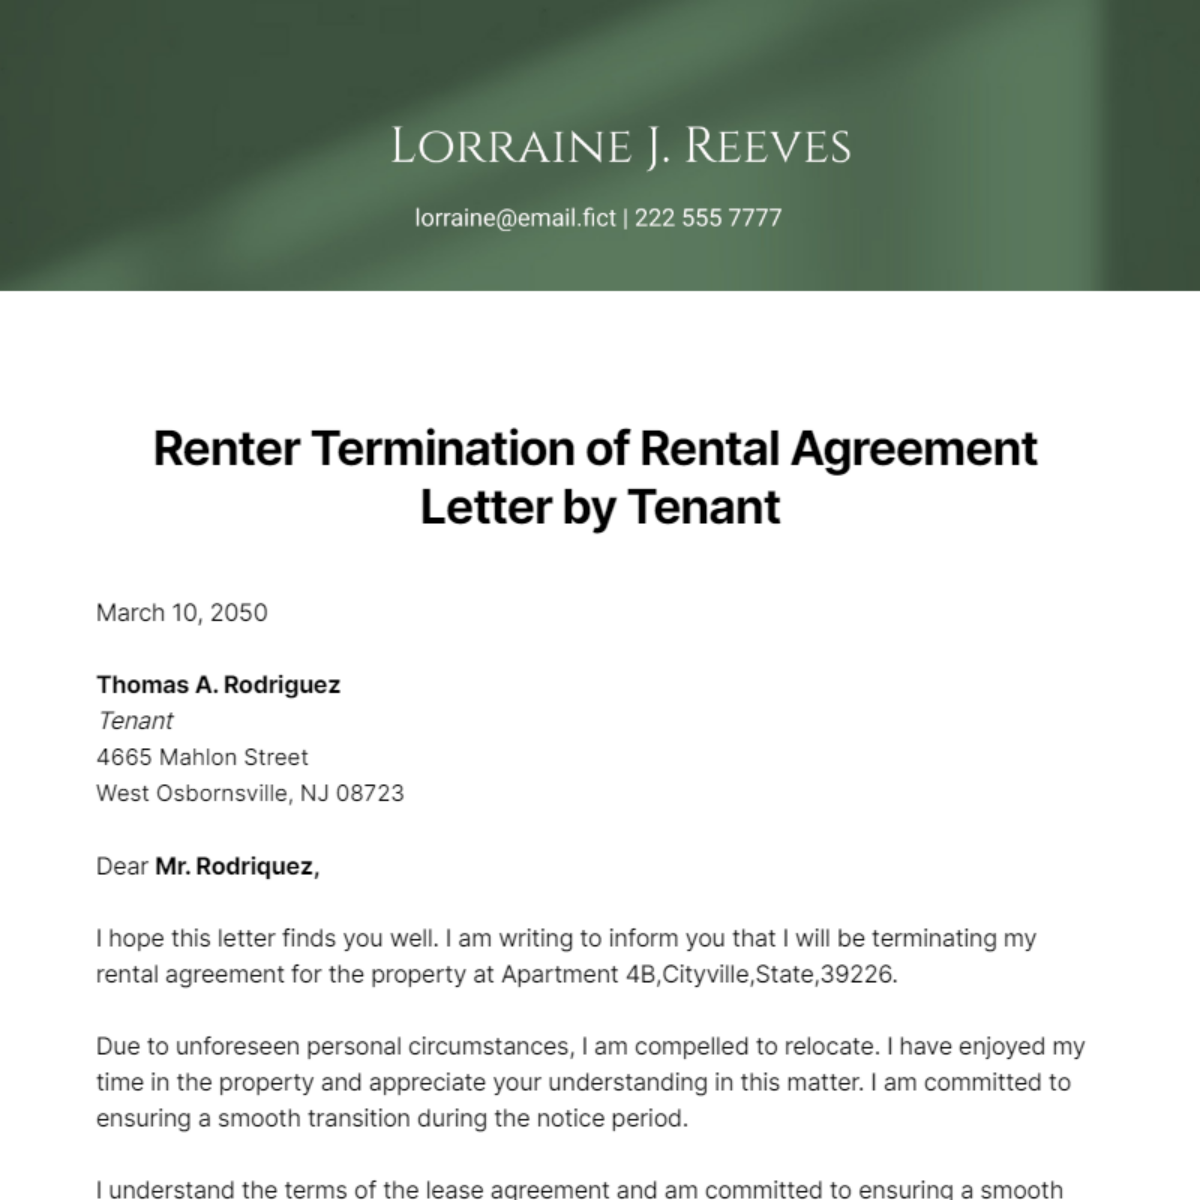 Renter Termination of Rental Agreement Letter by Tenant Template